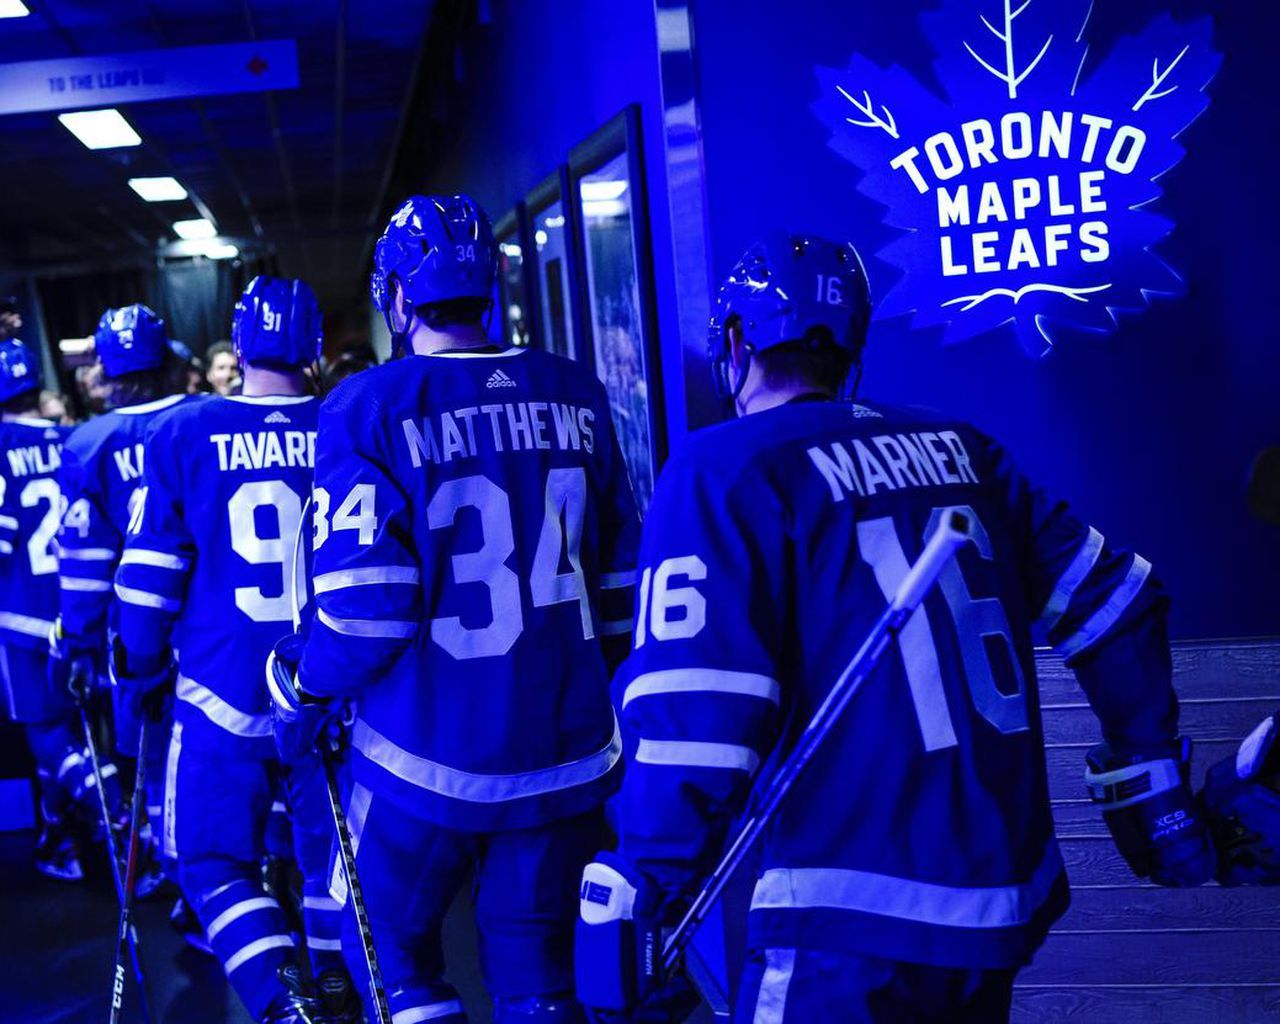 2021 Toronto Maple Leafs Wallpapers Wallpaper Cave